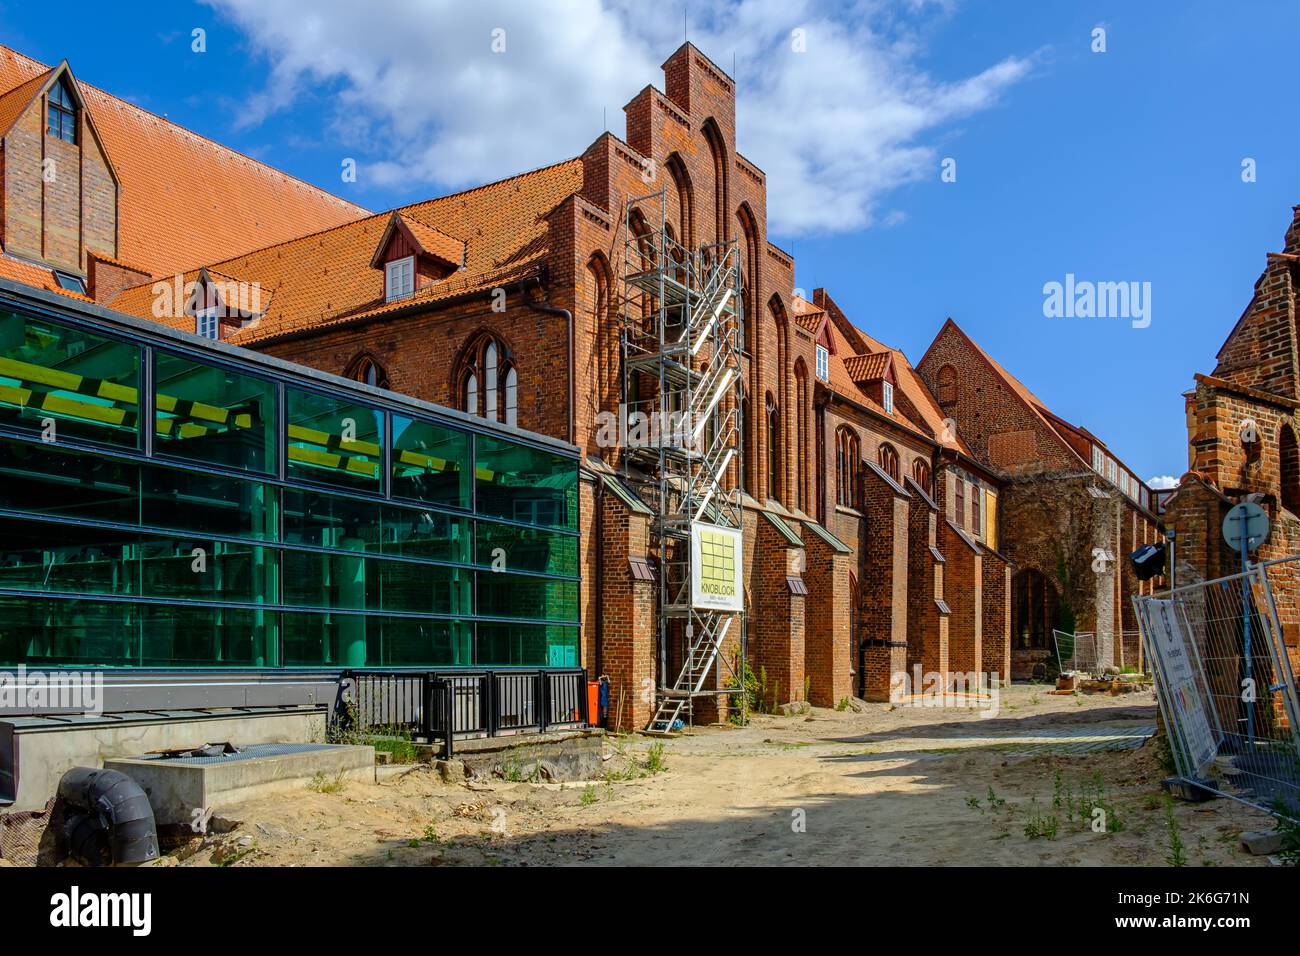 The Stralsund Oceanographic Museum in the former Monastery of St. Catherine, headquarters of the German Oceanographic Museum, Stralsund, Germany. Stock Photo